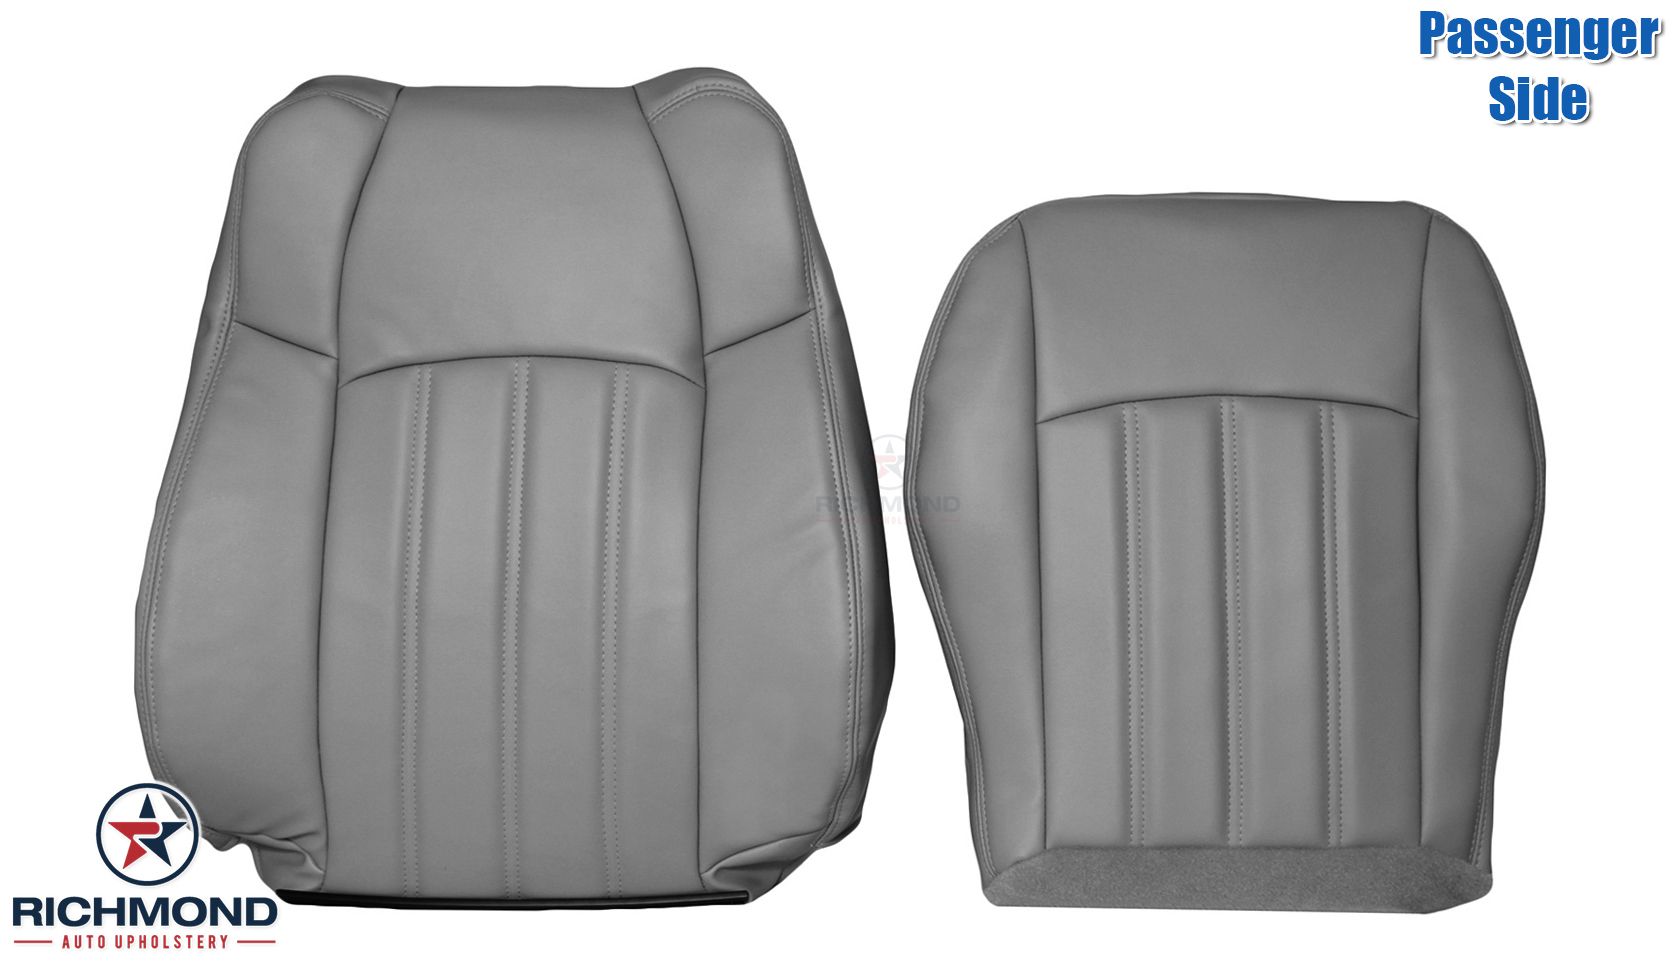 2006 2007 Chrysler 300 C 300C -Passenger Side Complete Leather Seat Covers Gray | eBay Car Seat Covers For 2006 Chrysler 300